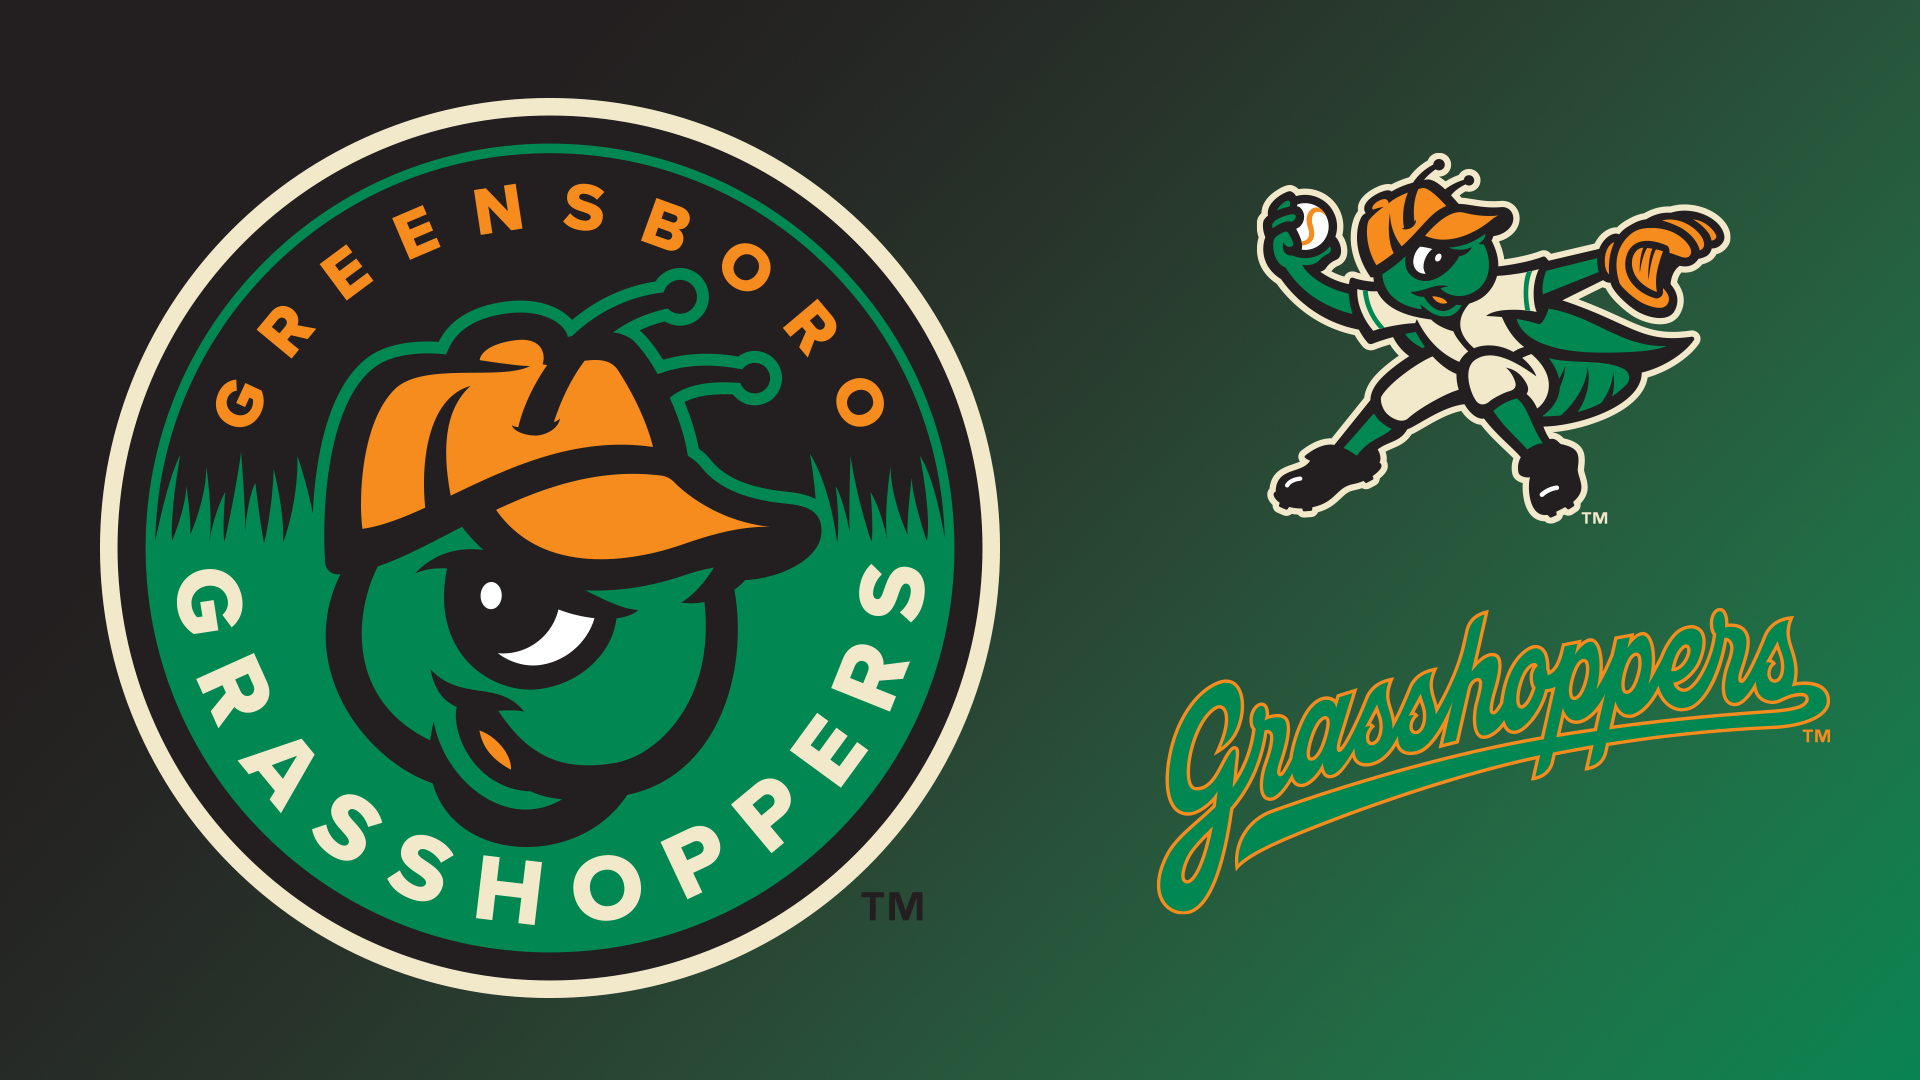 The Greensboro Grasshoppers' new look